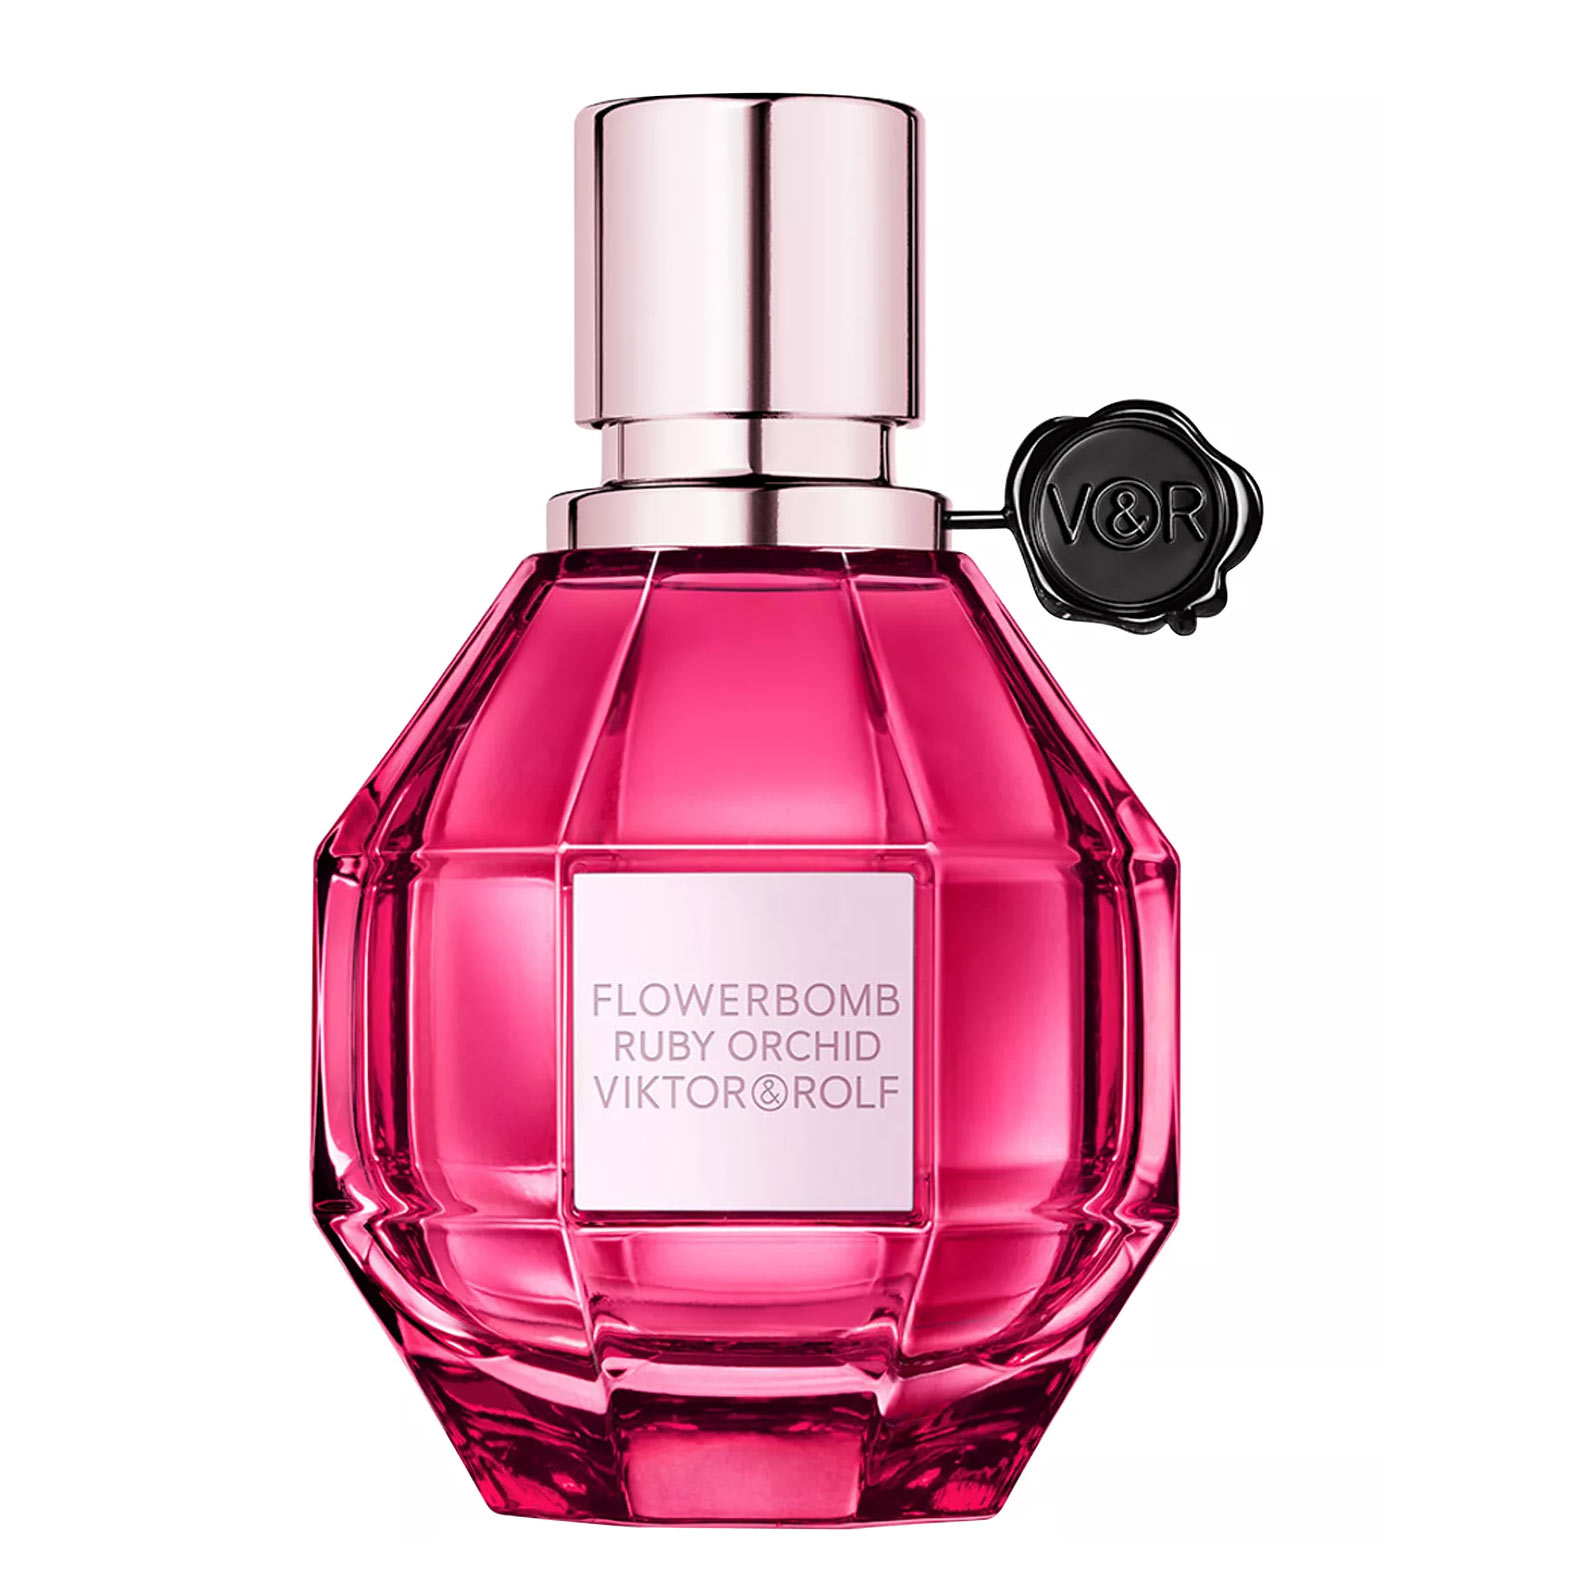 Flowerbomb-Ruby-Orchid-Viktor-and-Rolf